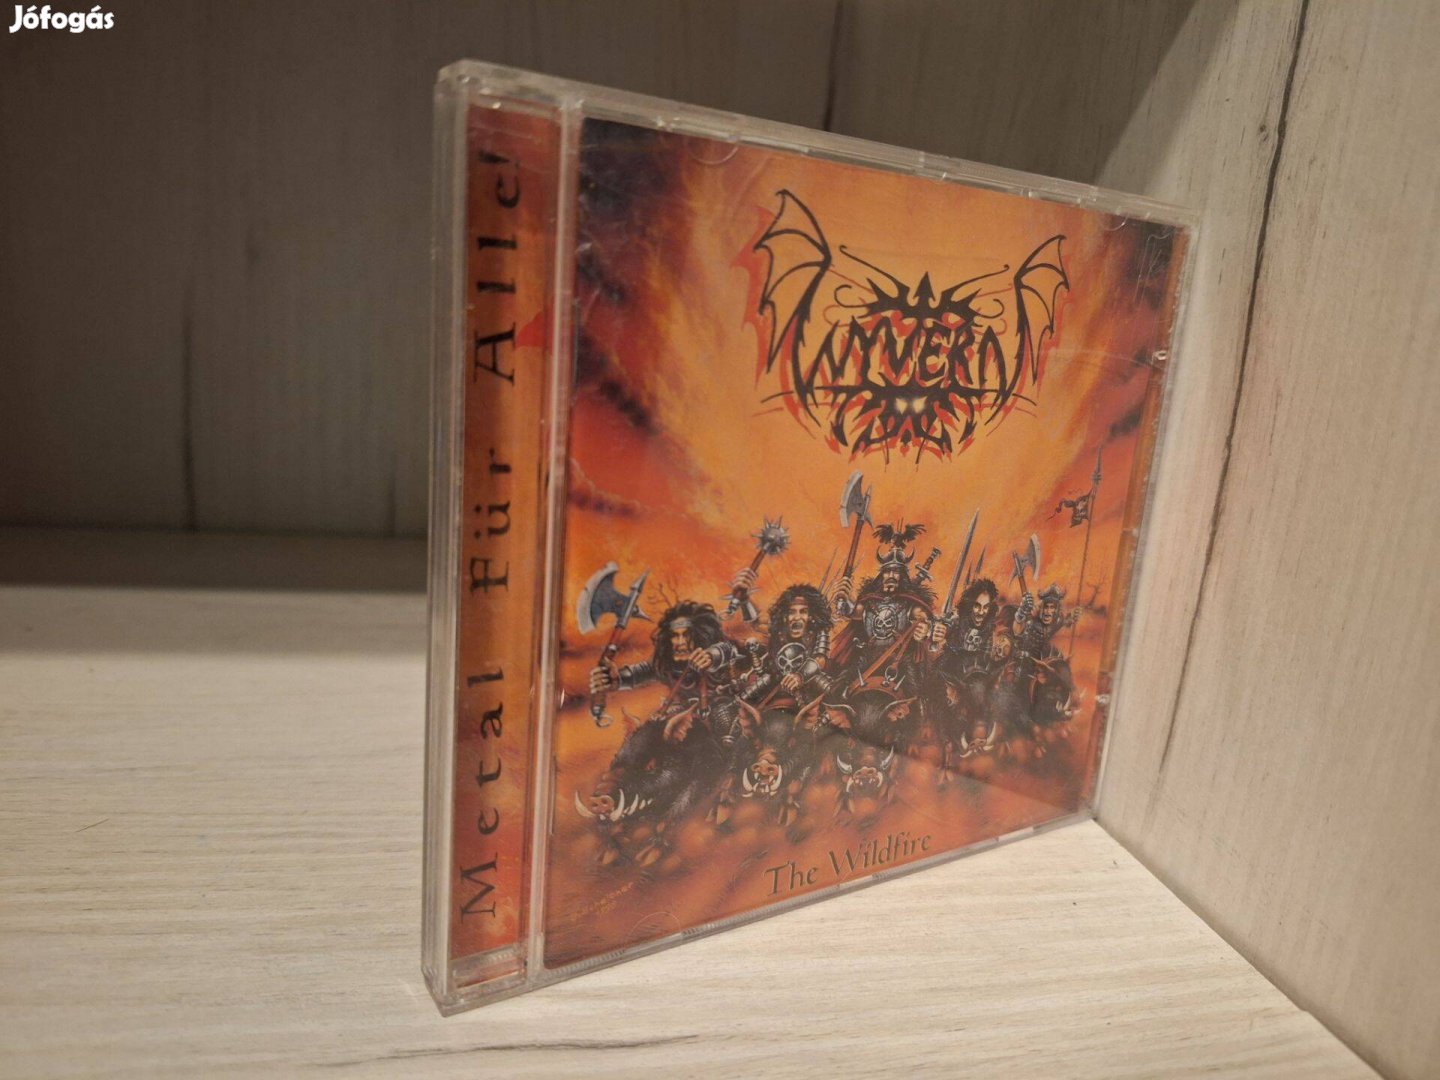 Wyvern - The Wildfire CD